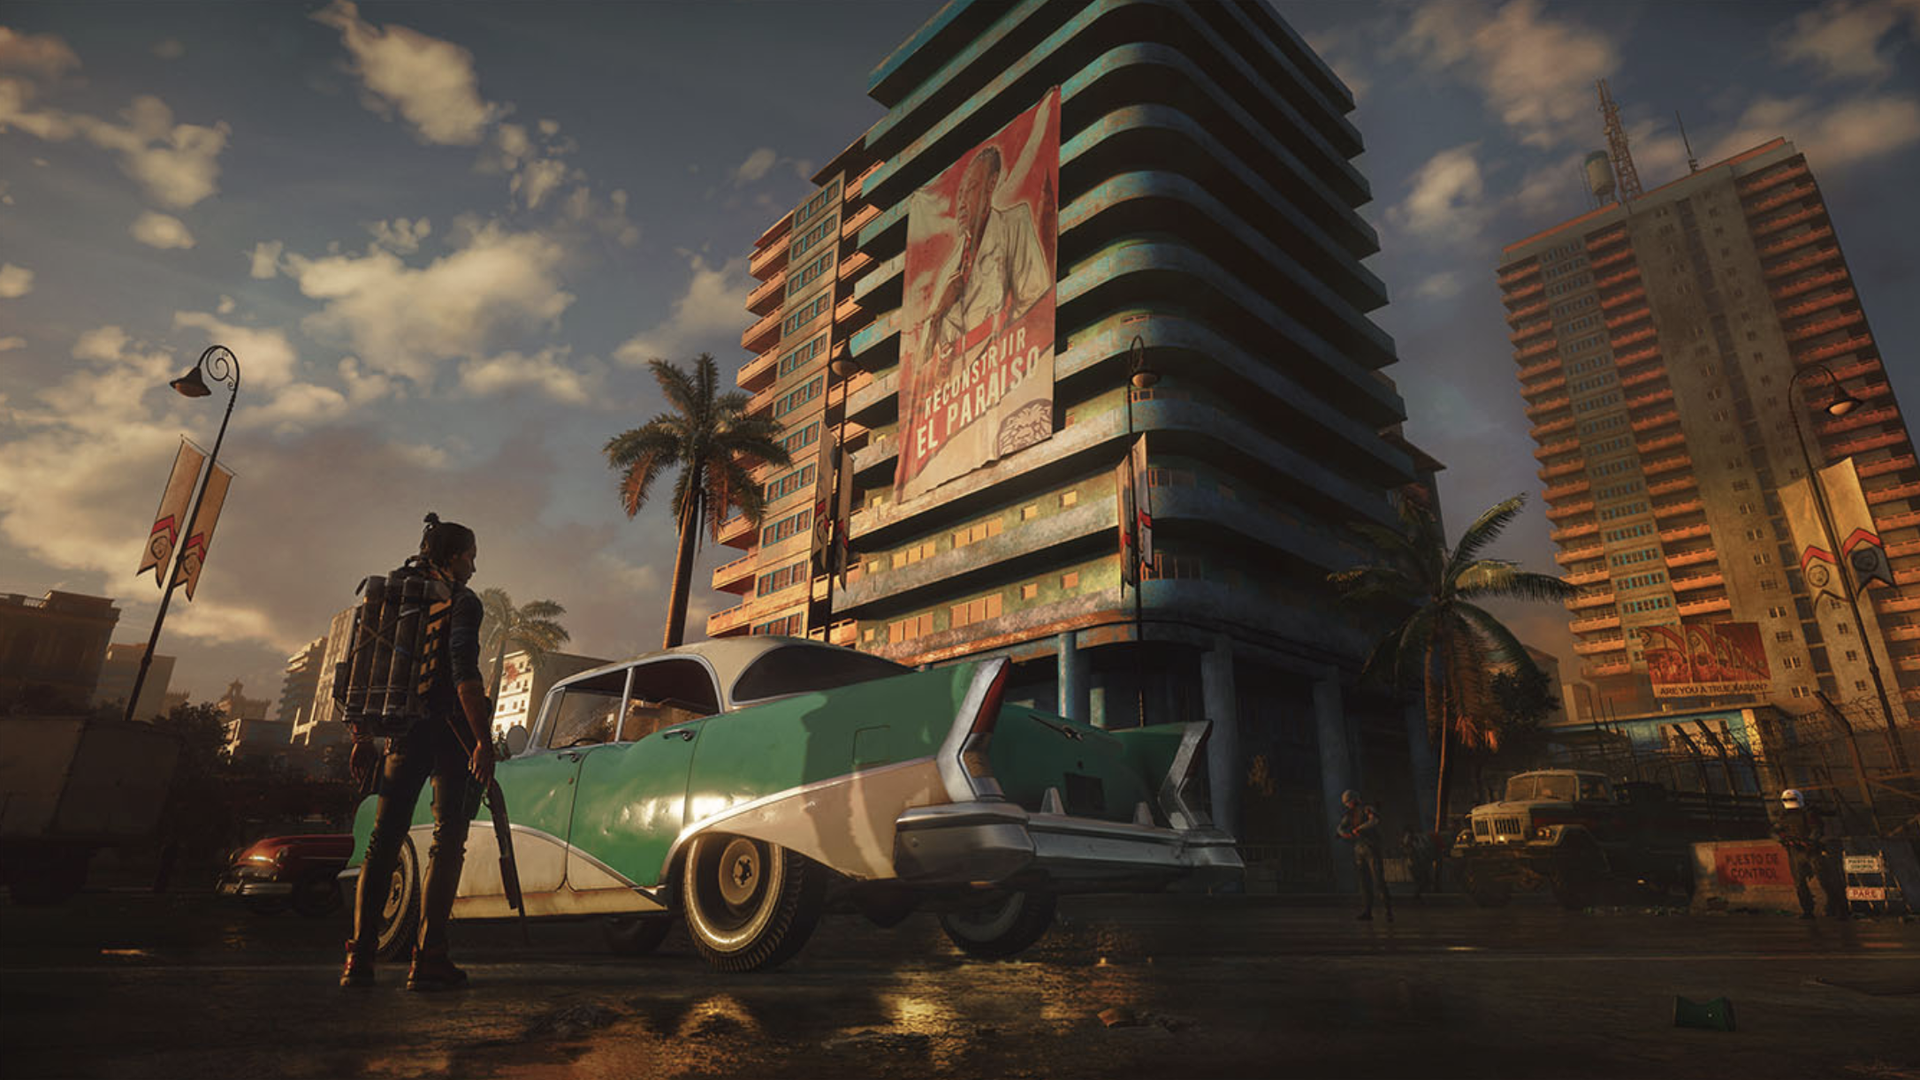 A rebel fighter stands next to an old-fashioned car, near a palm tree and a hotel with a political poster on it.